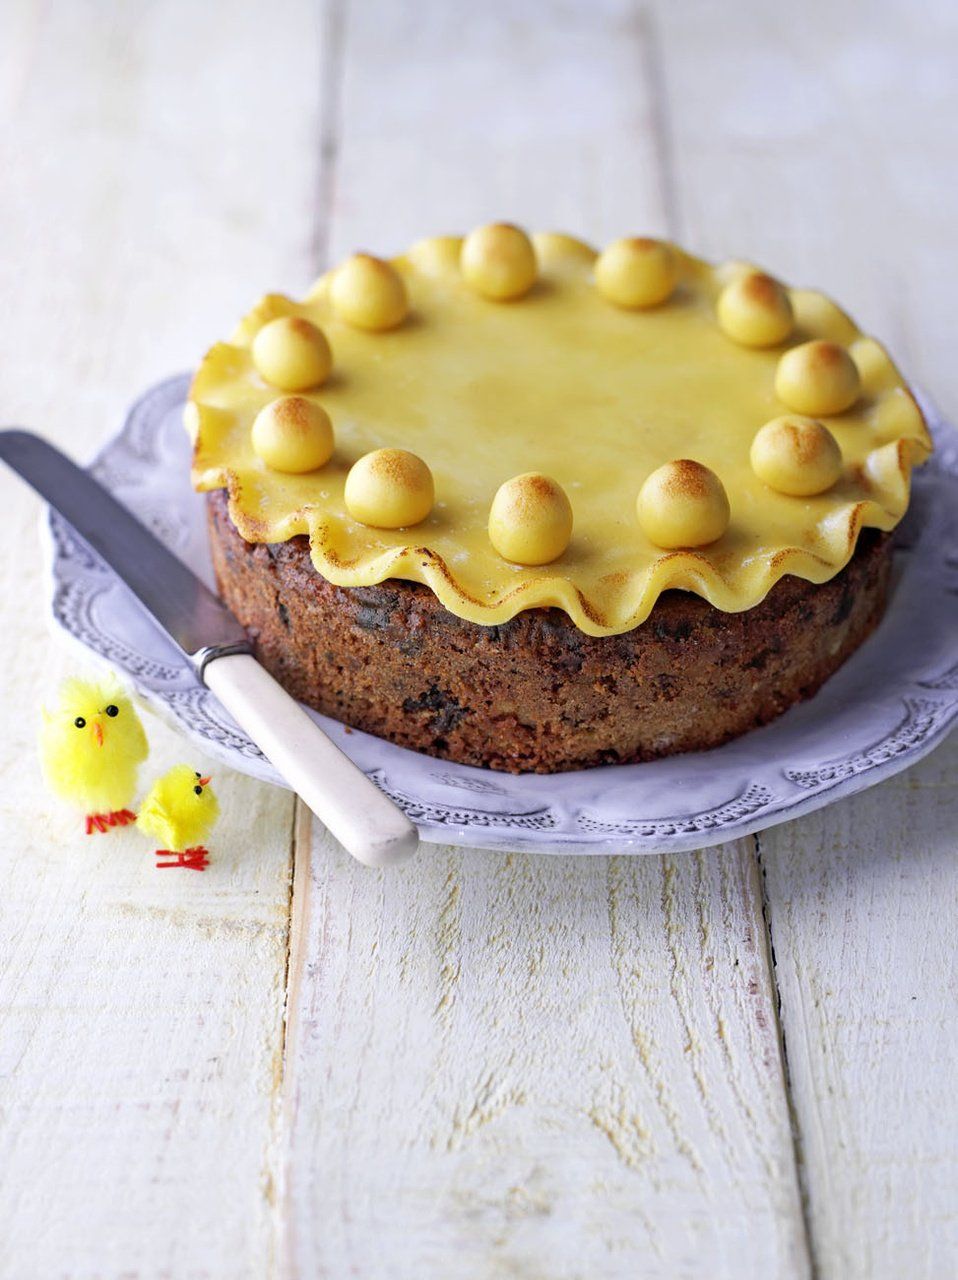 Jamie's Easter Simnel Cake - The Great British Bake Off | The Great British  Bake Off